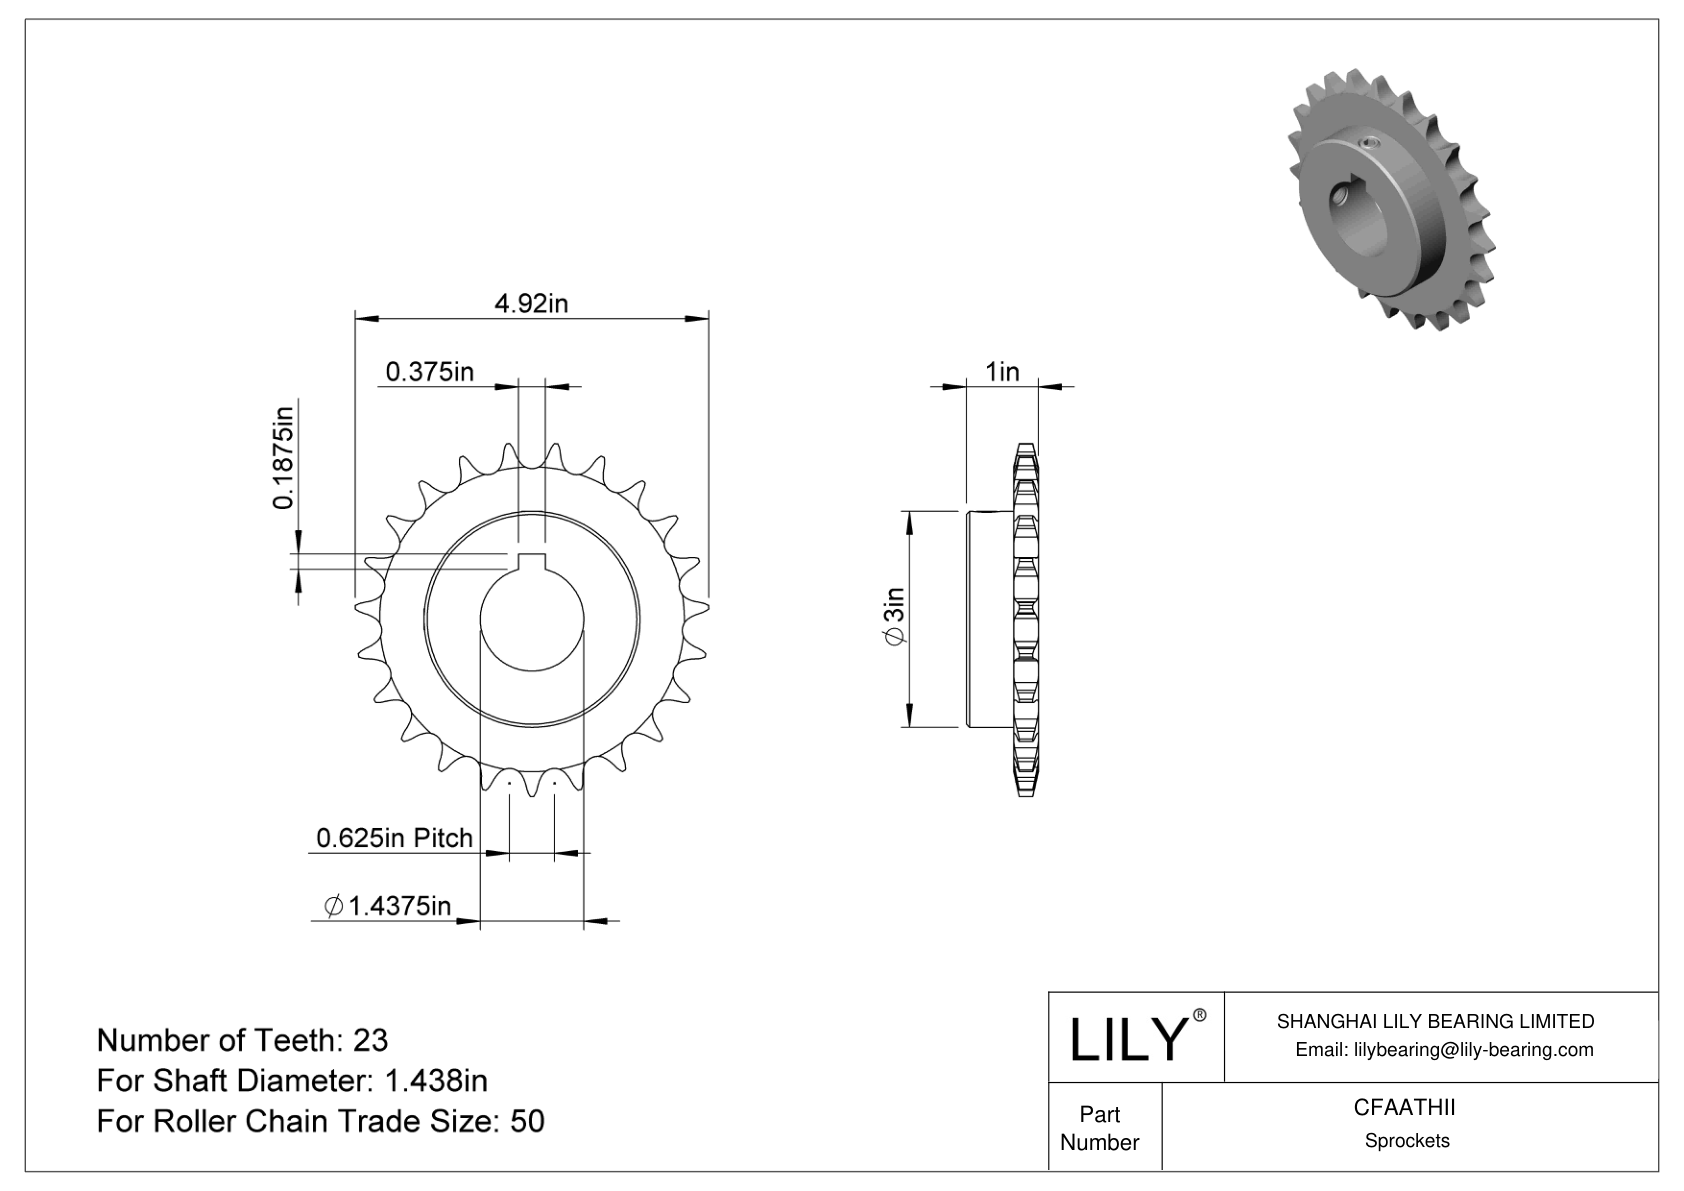 CFAATHII Wear-Resistant Sprockets for ANSI Roller Chain cad drawing